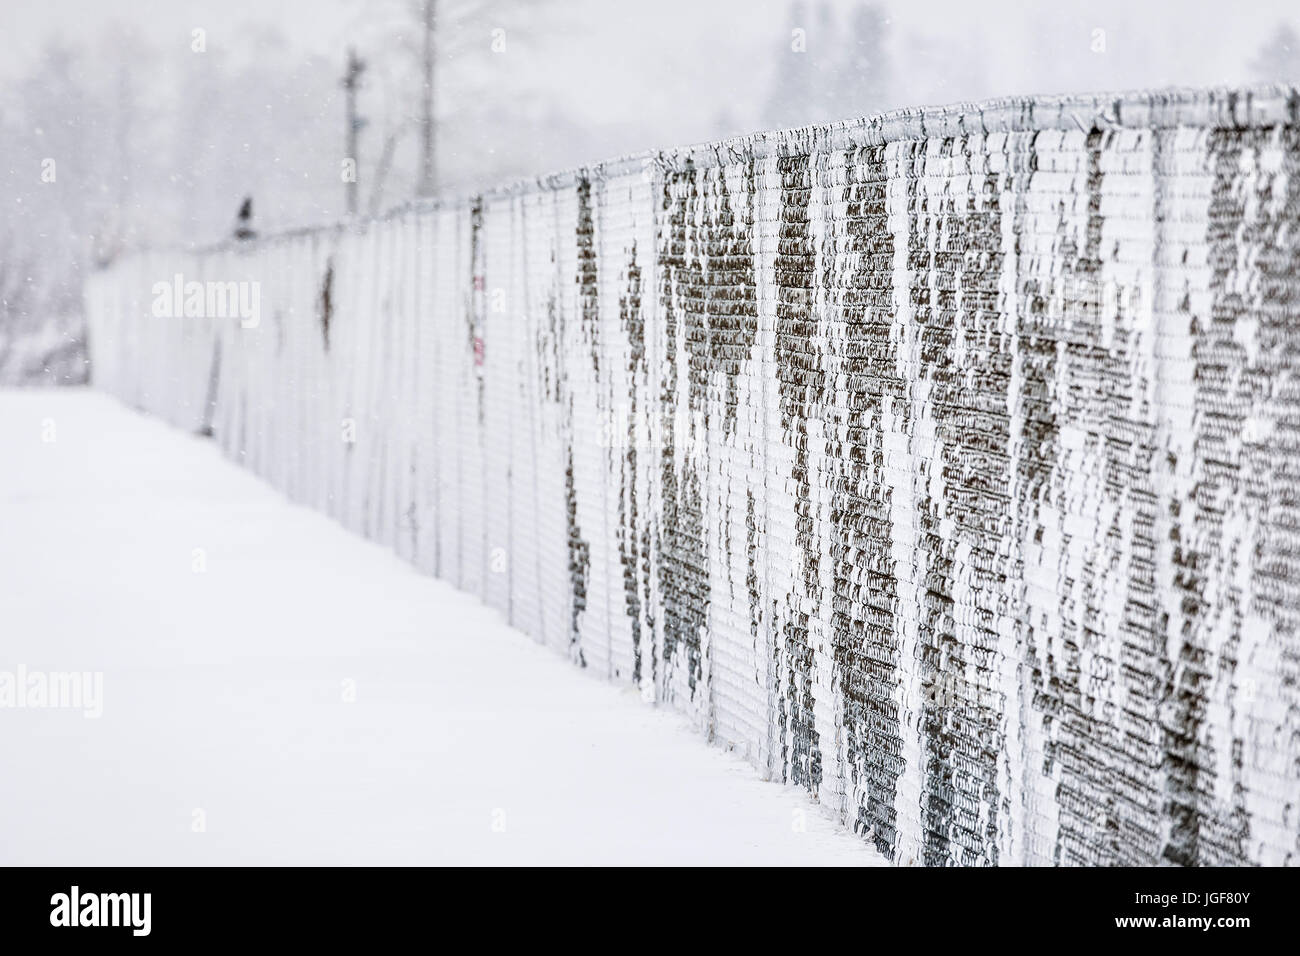 Chain-link fence covered with ice and snow, Thunder Bay, Ontario, Canada. Stock Photo